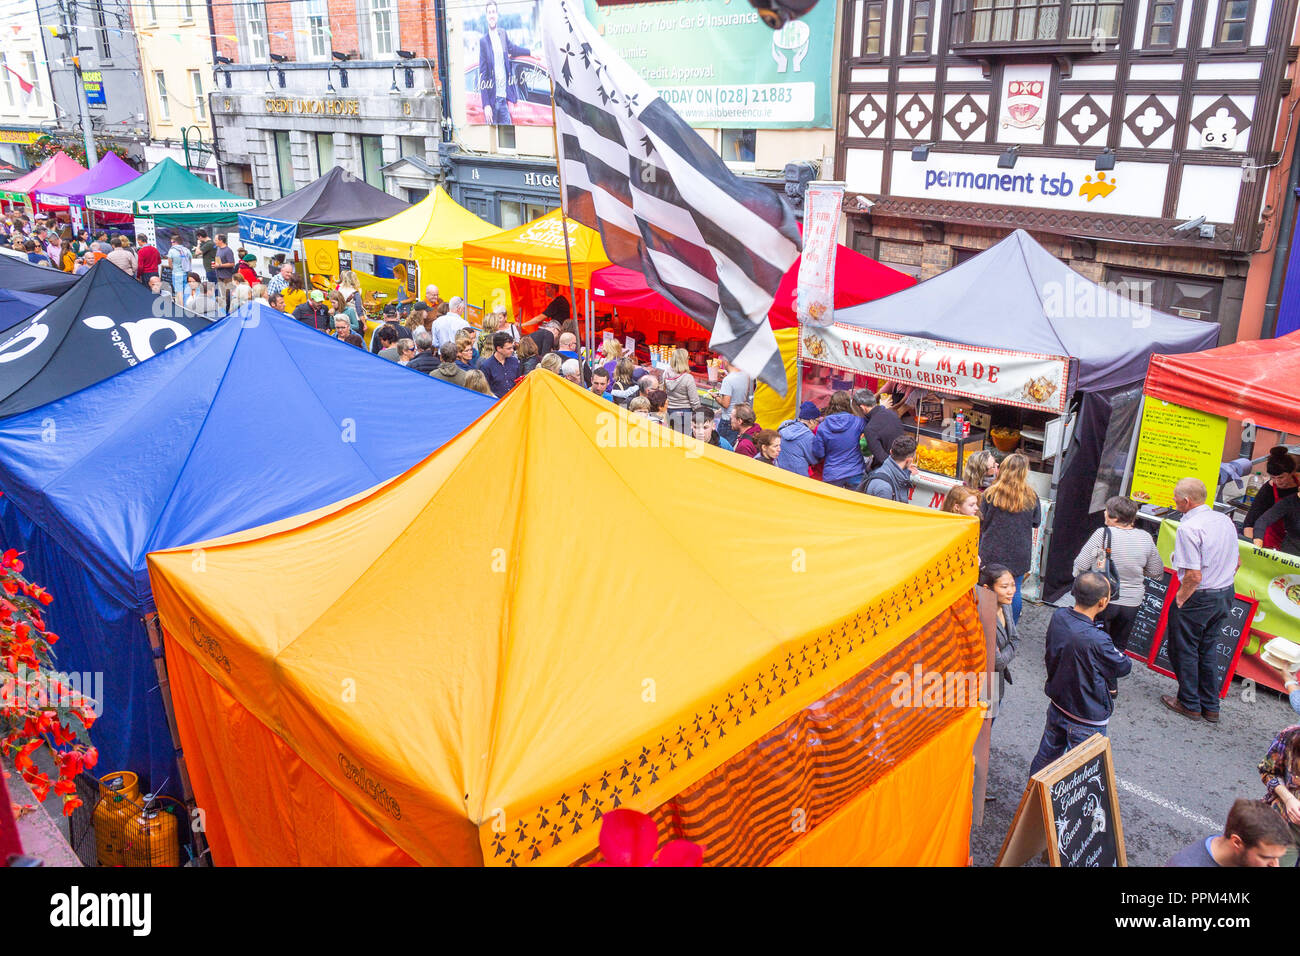 taste of west cork outdoor food festival attracts crowds of shoppers skibbereen west cork ireland. Stock Photo